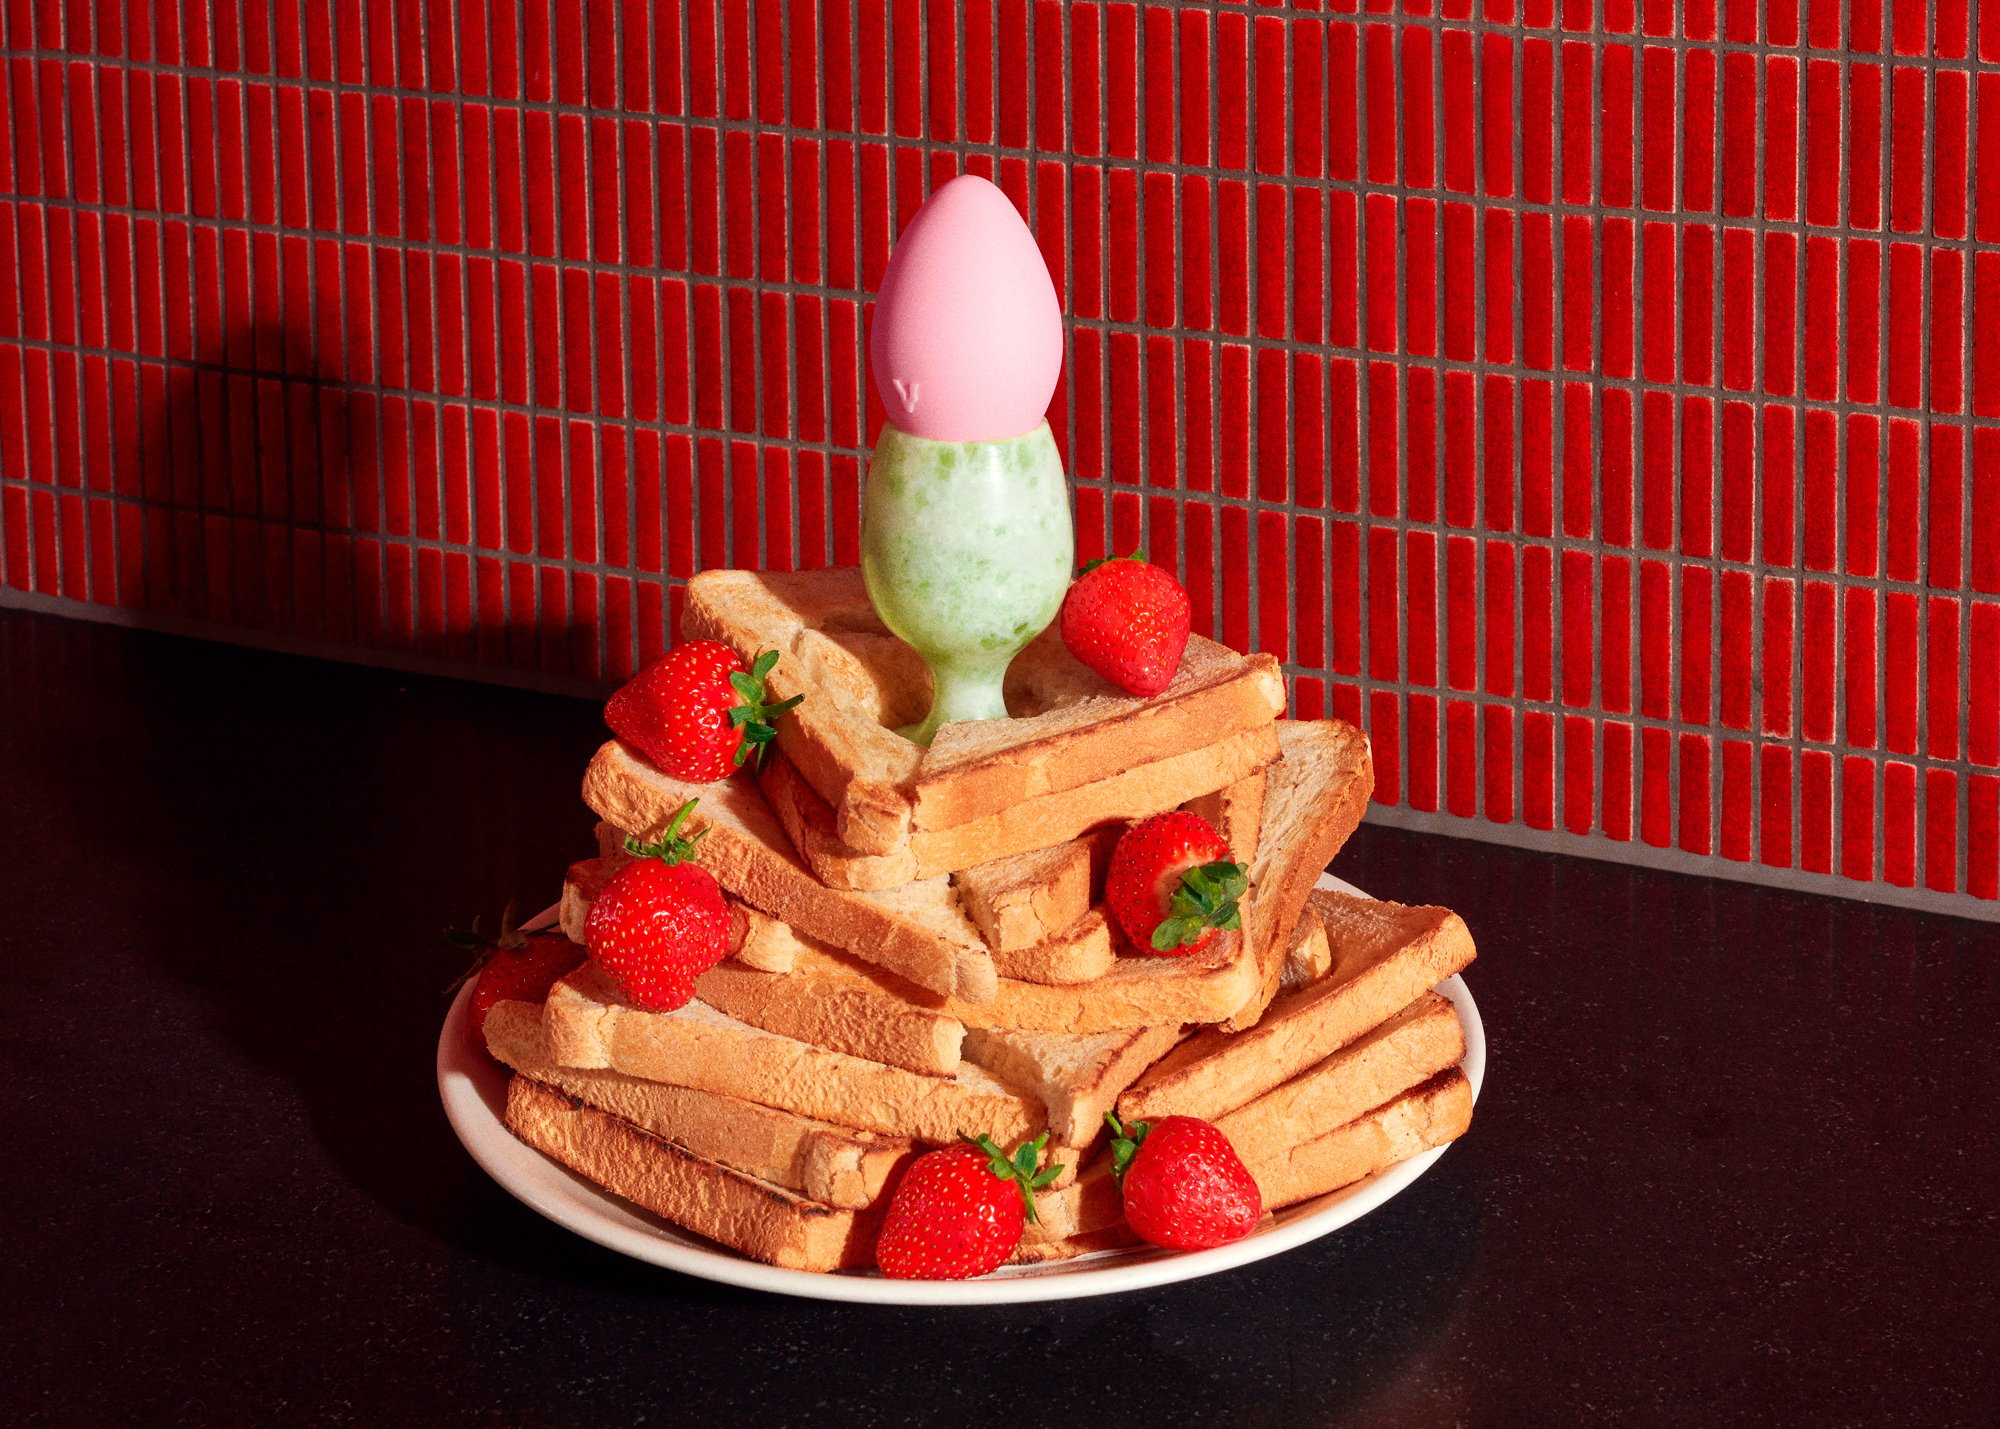 A small vibrator pictures on top of a plate of toast and strawberries.